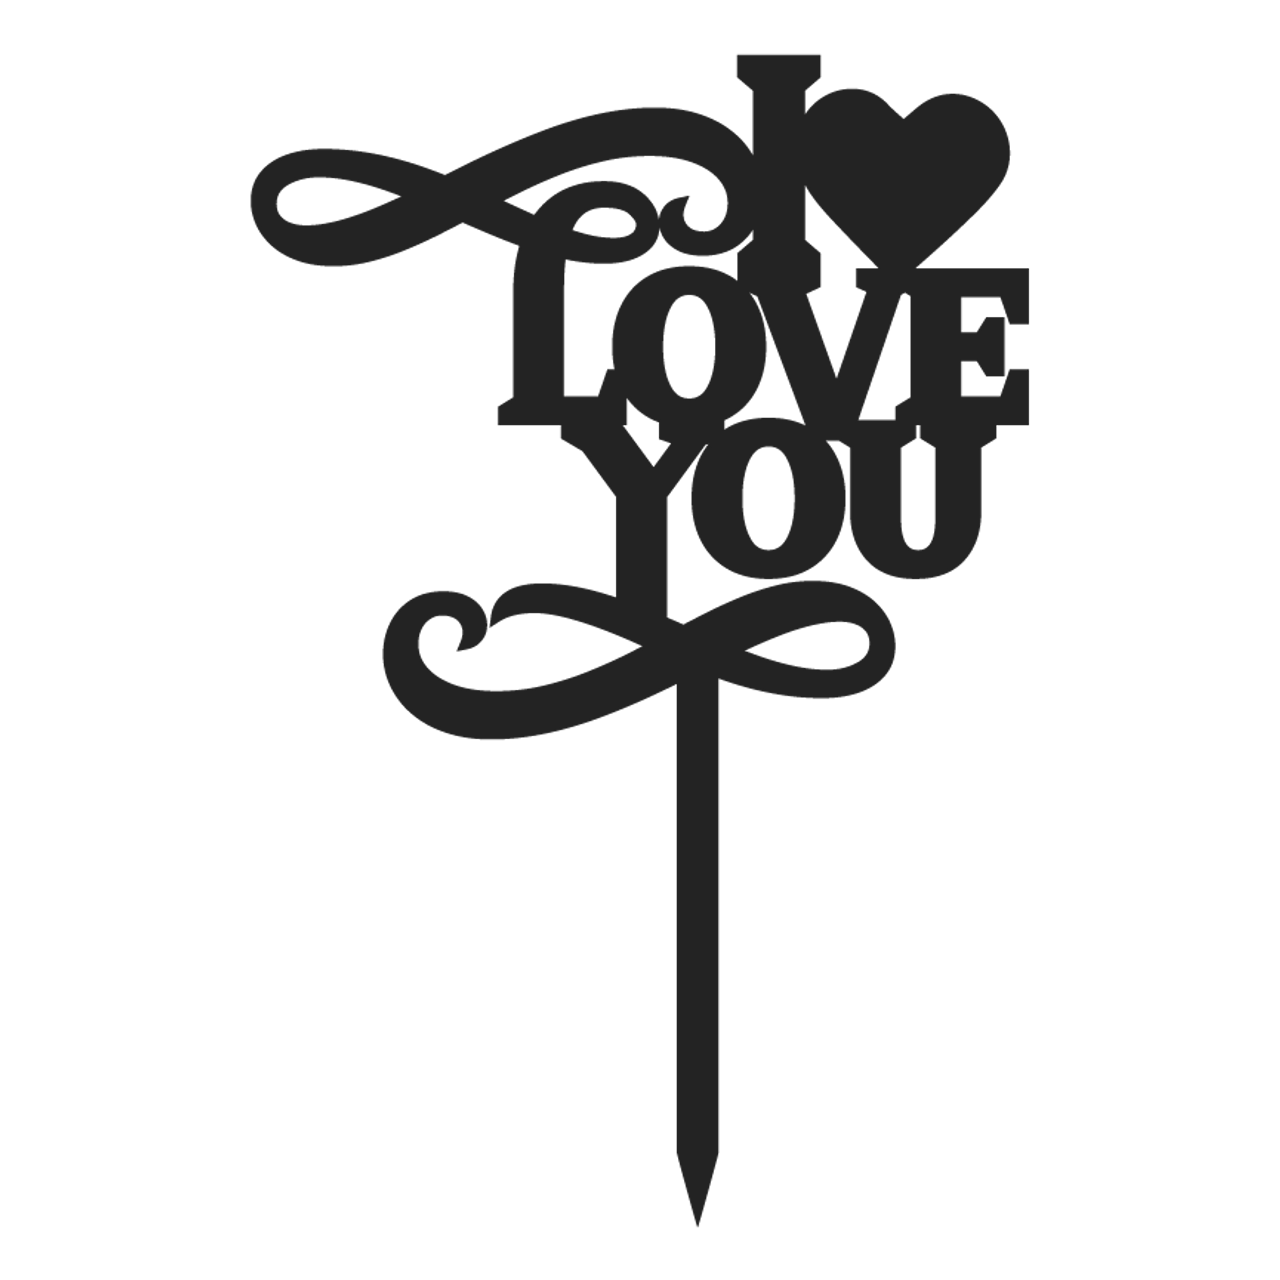 I Love You Cake Topper Svg Svg Eps Png Dxf Cut Files For Cricut And Silhouette Cameo By Savanasdesign